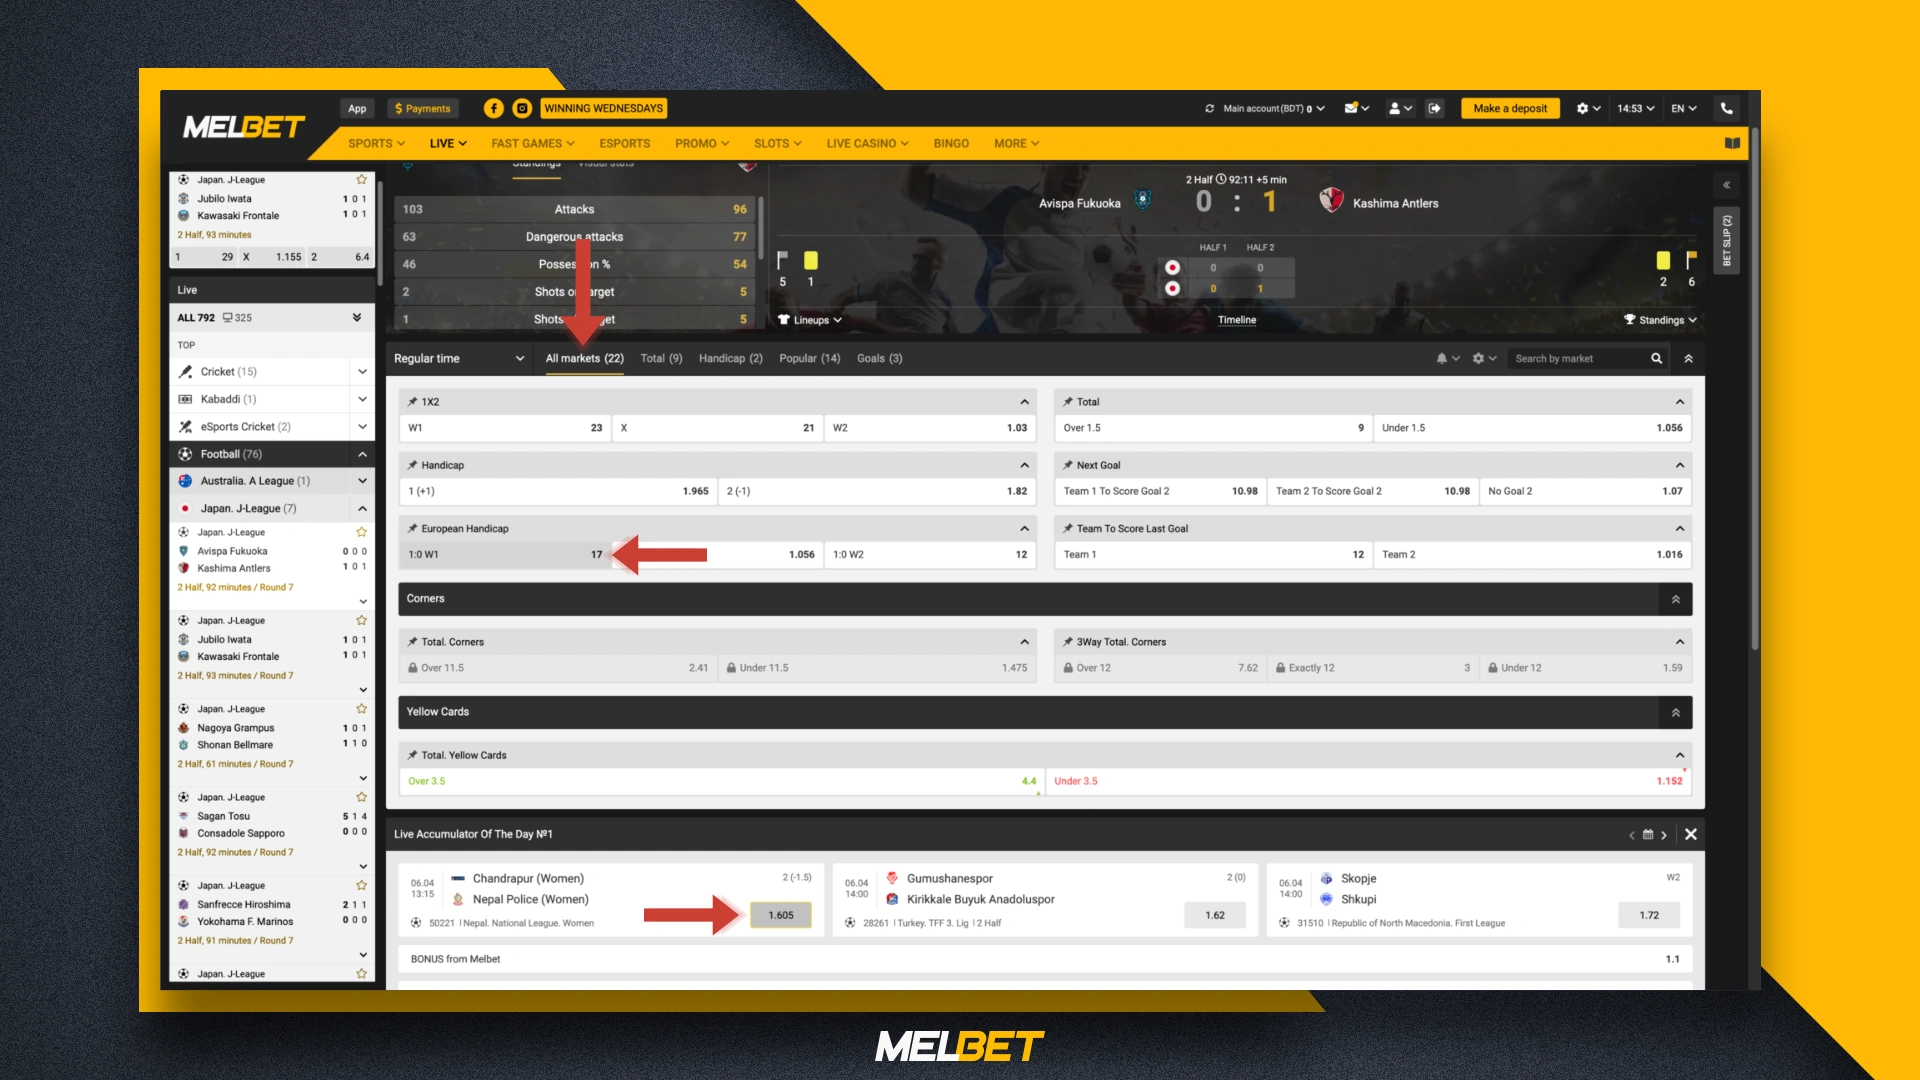 Selecting bets and odds on the Melbet website